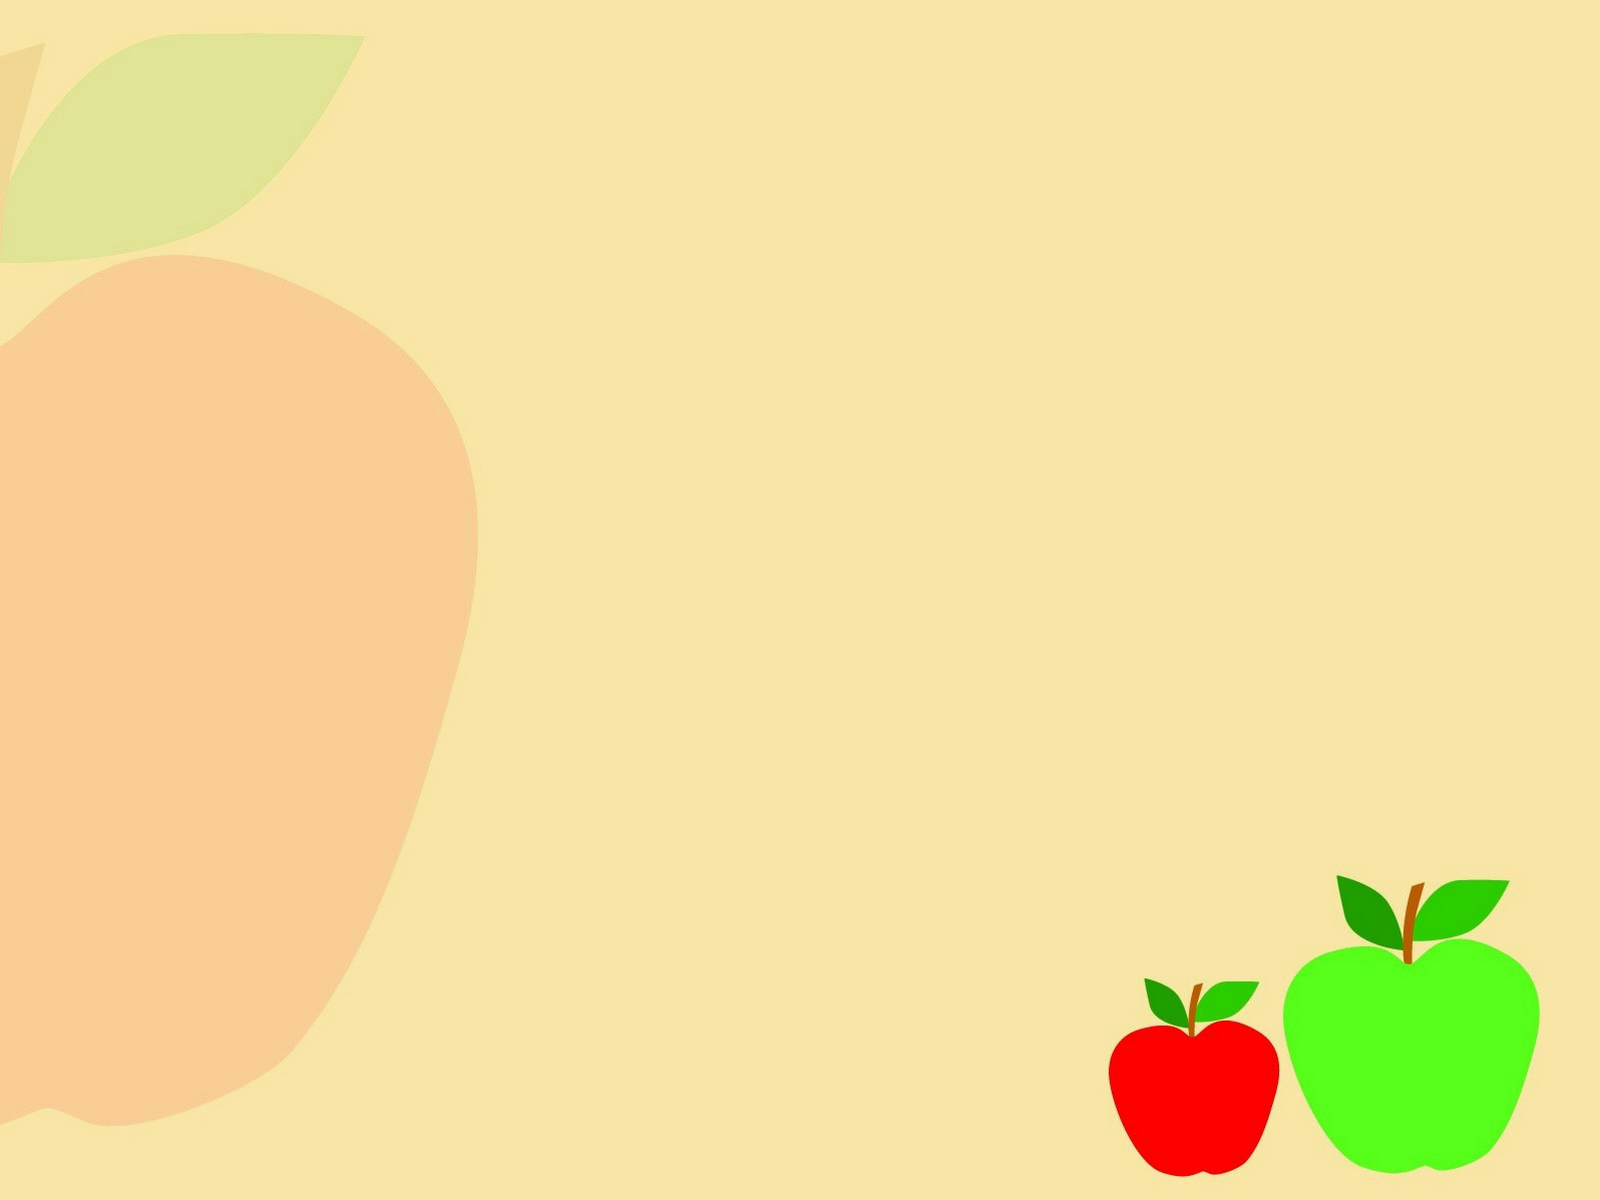 Apples Green And Red PPT Backgrounds